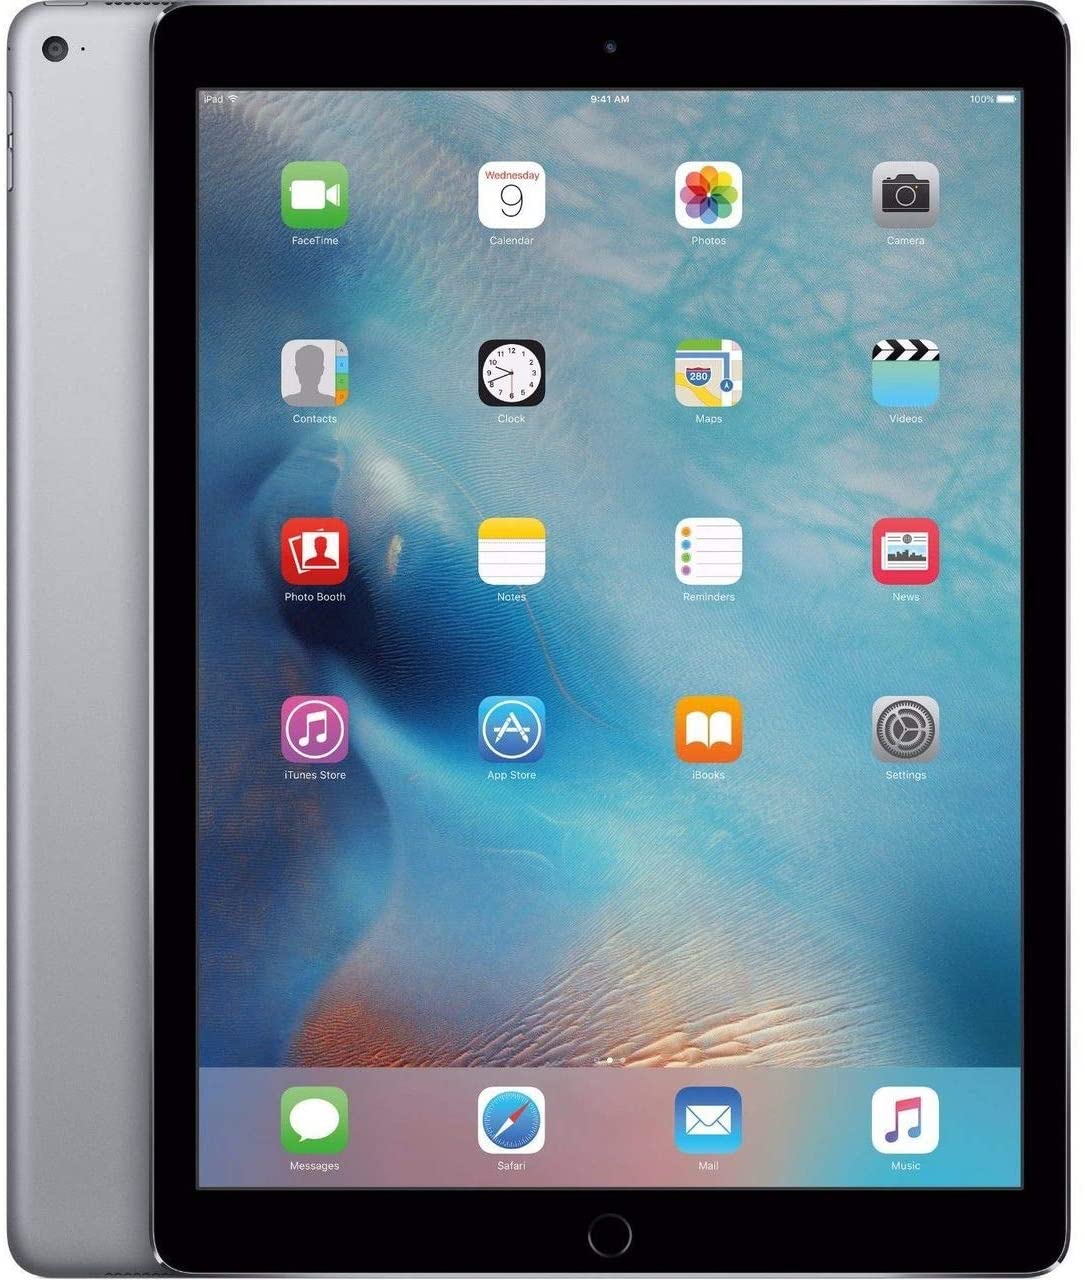 Apple iPad 5th Generation, 32GB, WIFI + 4G Unlocked All Carriers - Space Gray (Certified Refurbished)